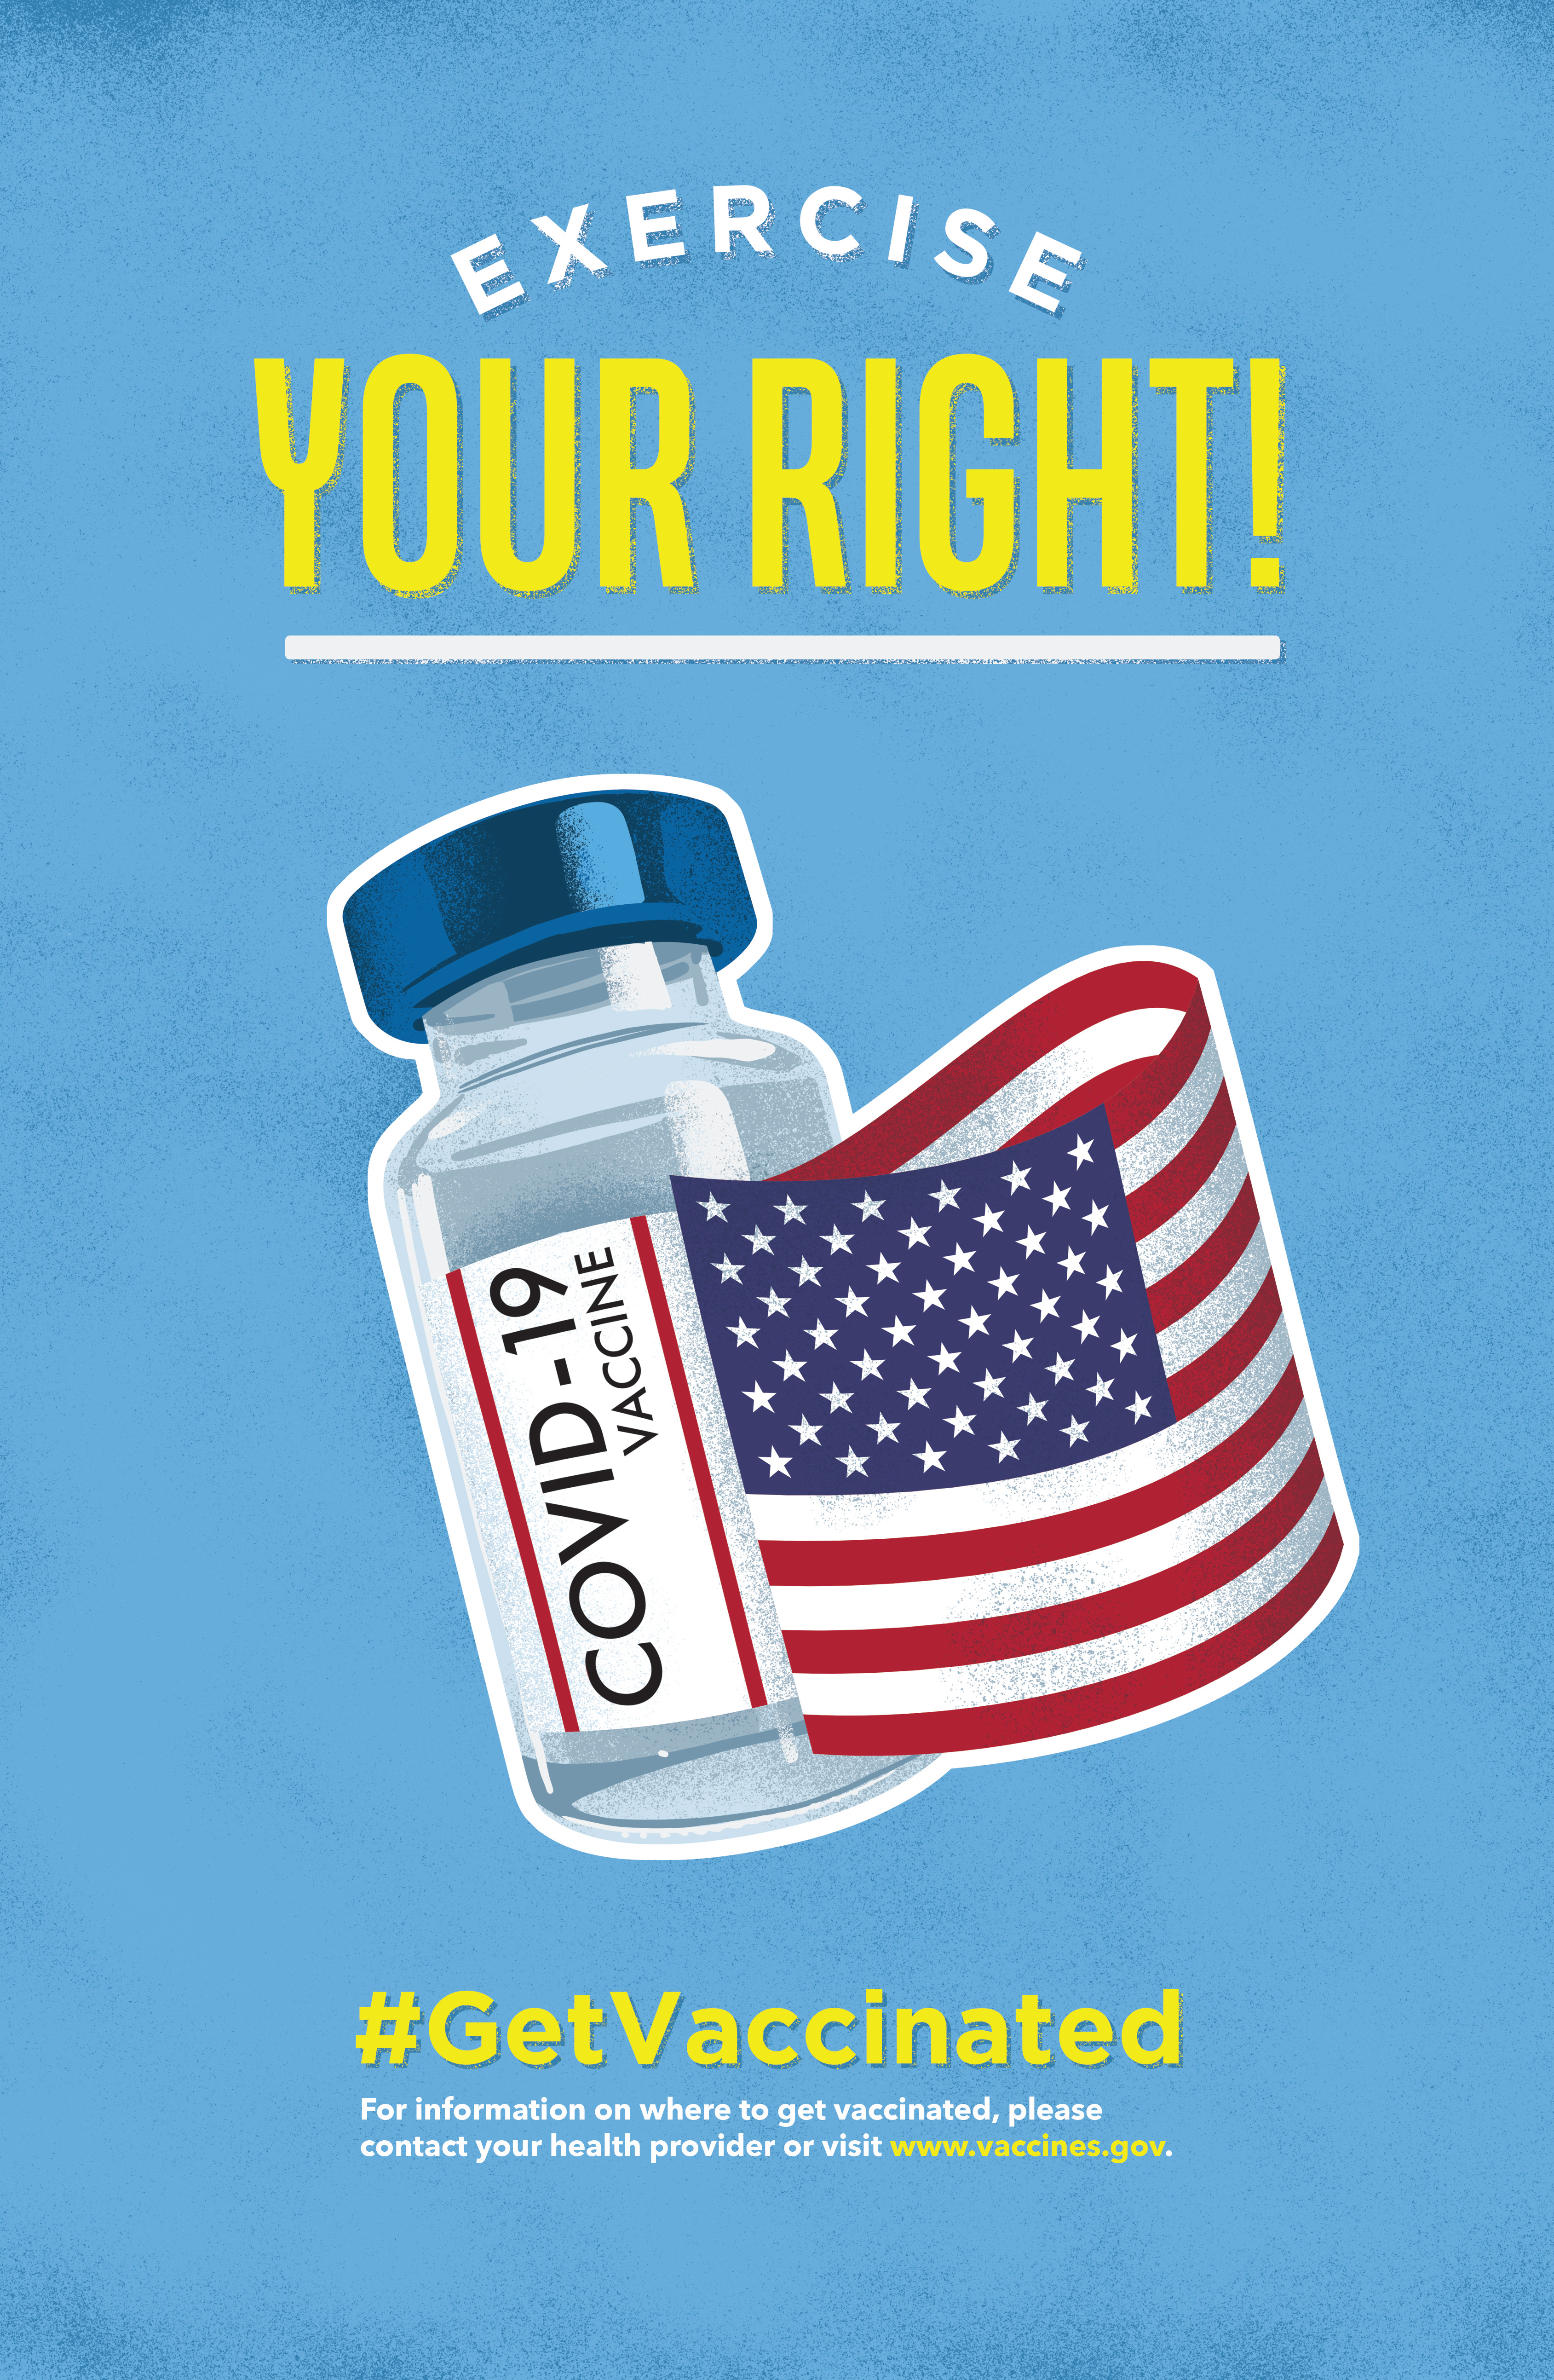 Poster with a COVID-19 vaccine vial and the American flag. Text reads, "Exercise your right! Get vaccinated. For information on where to get vaccinated, please contact your health provider or visit www.vaccines.gov."